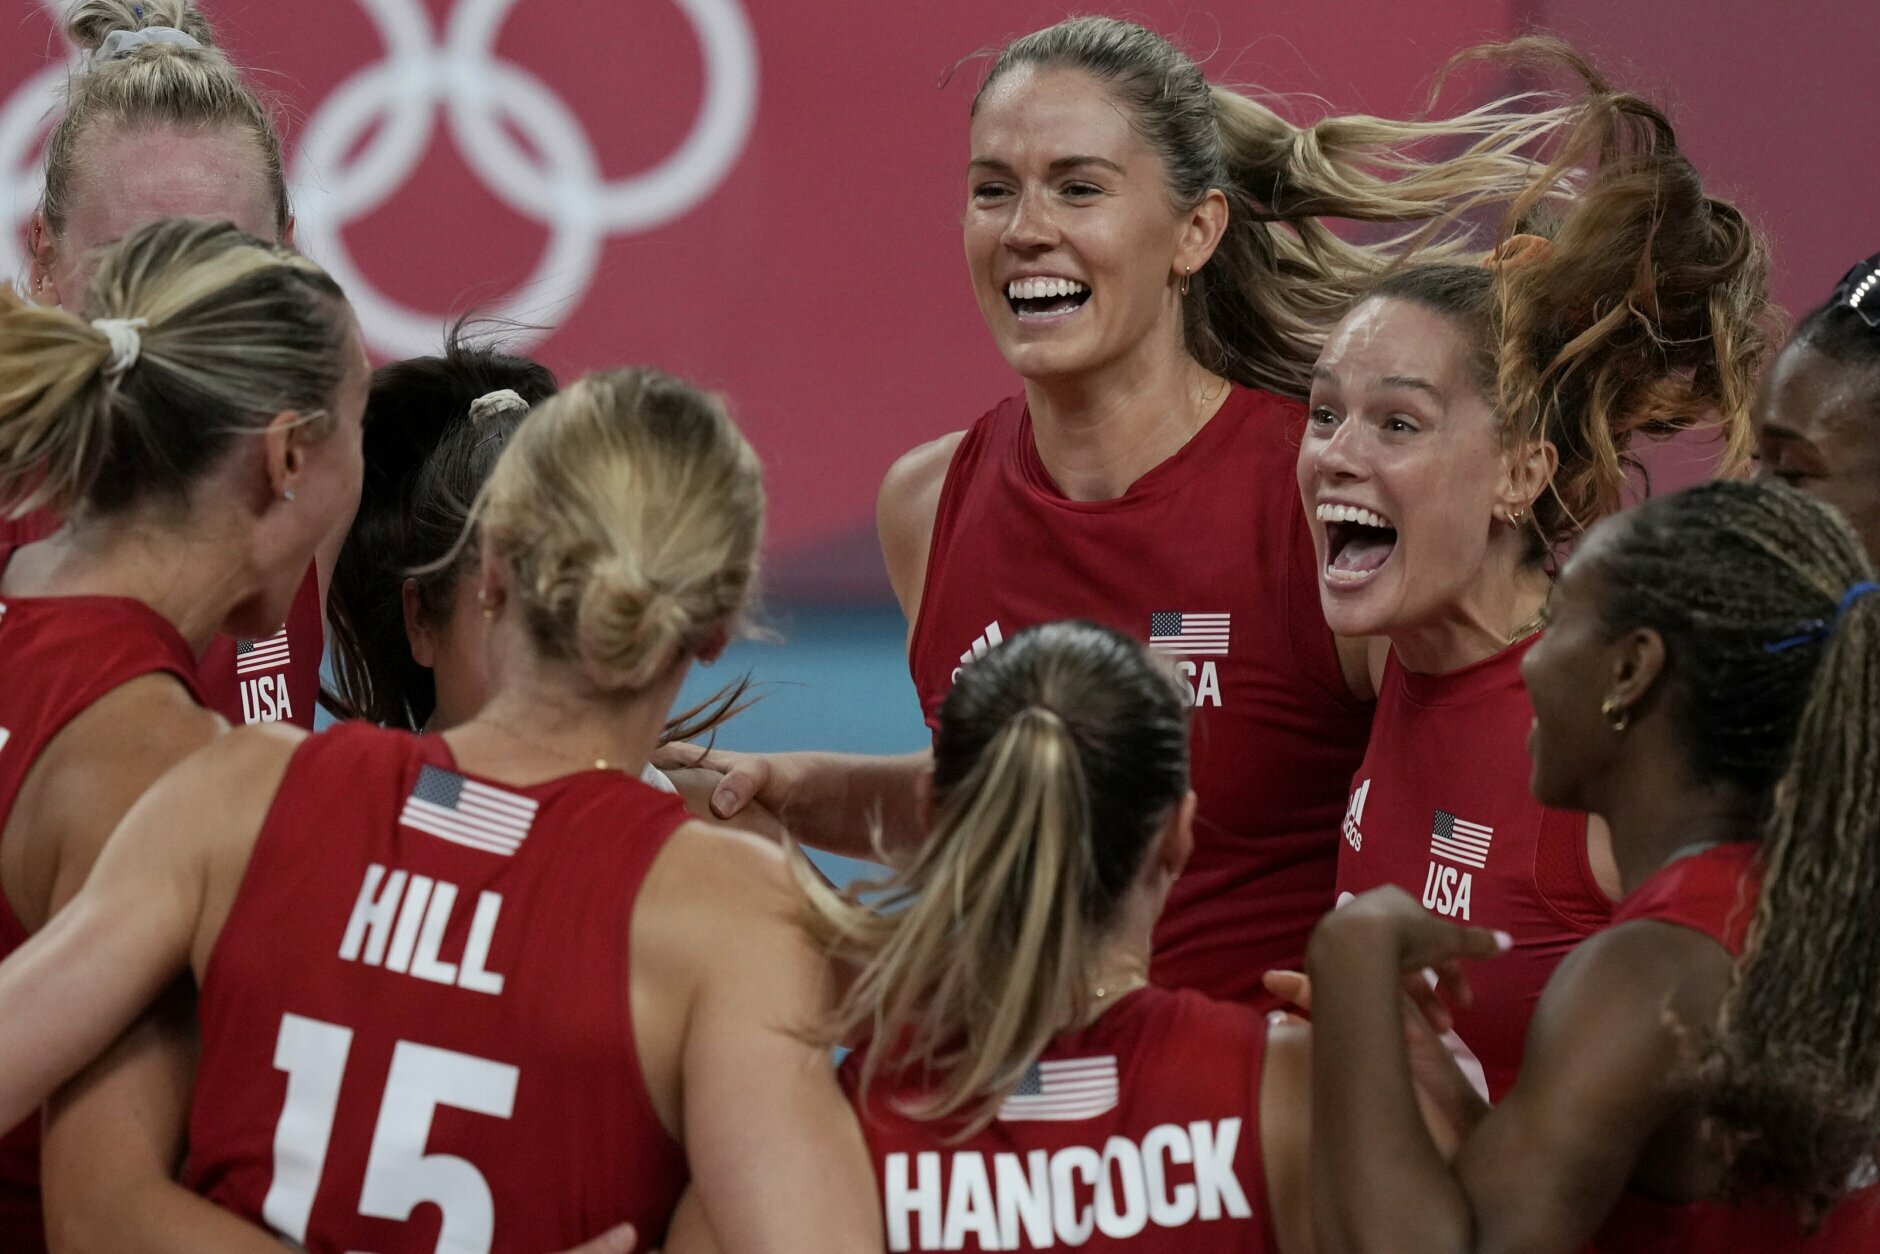 United states players celebrate winning the women's volleyball preliminary round pool B match between United States and Italy at the 2020 Summer Olympics, Monday, Aug. 2, 2021, in Tokyo, Japan. (AP Photo/Frank Augstein)